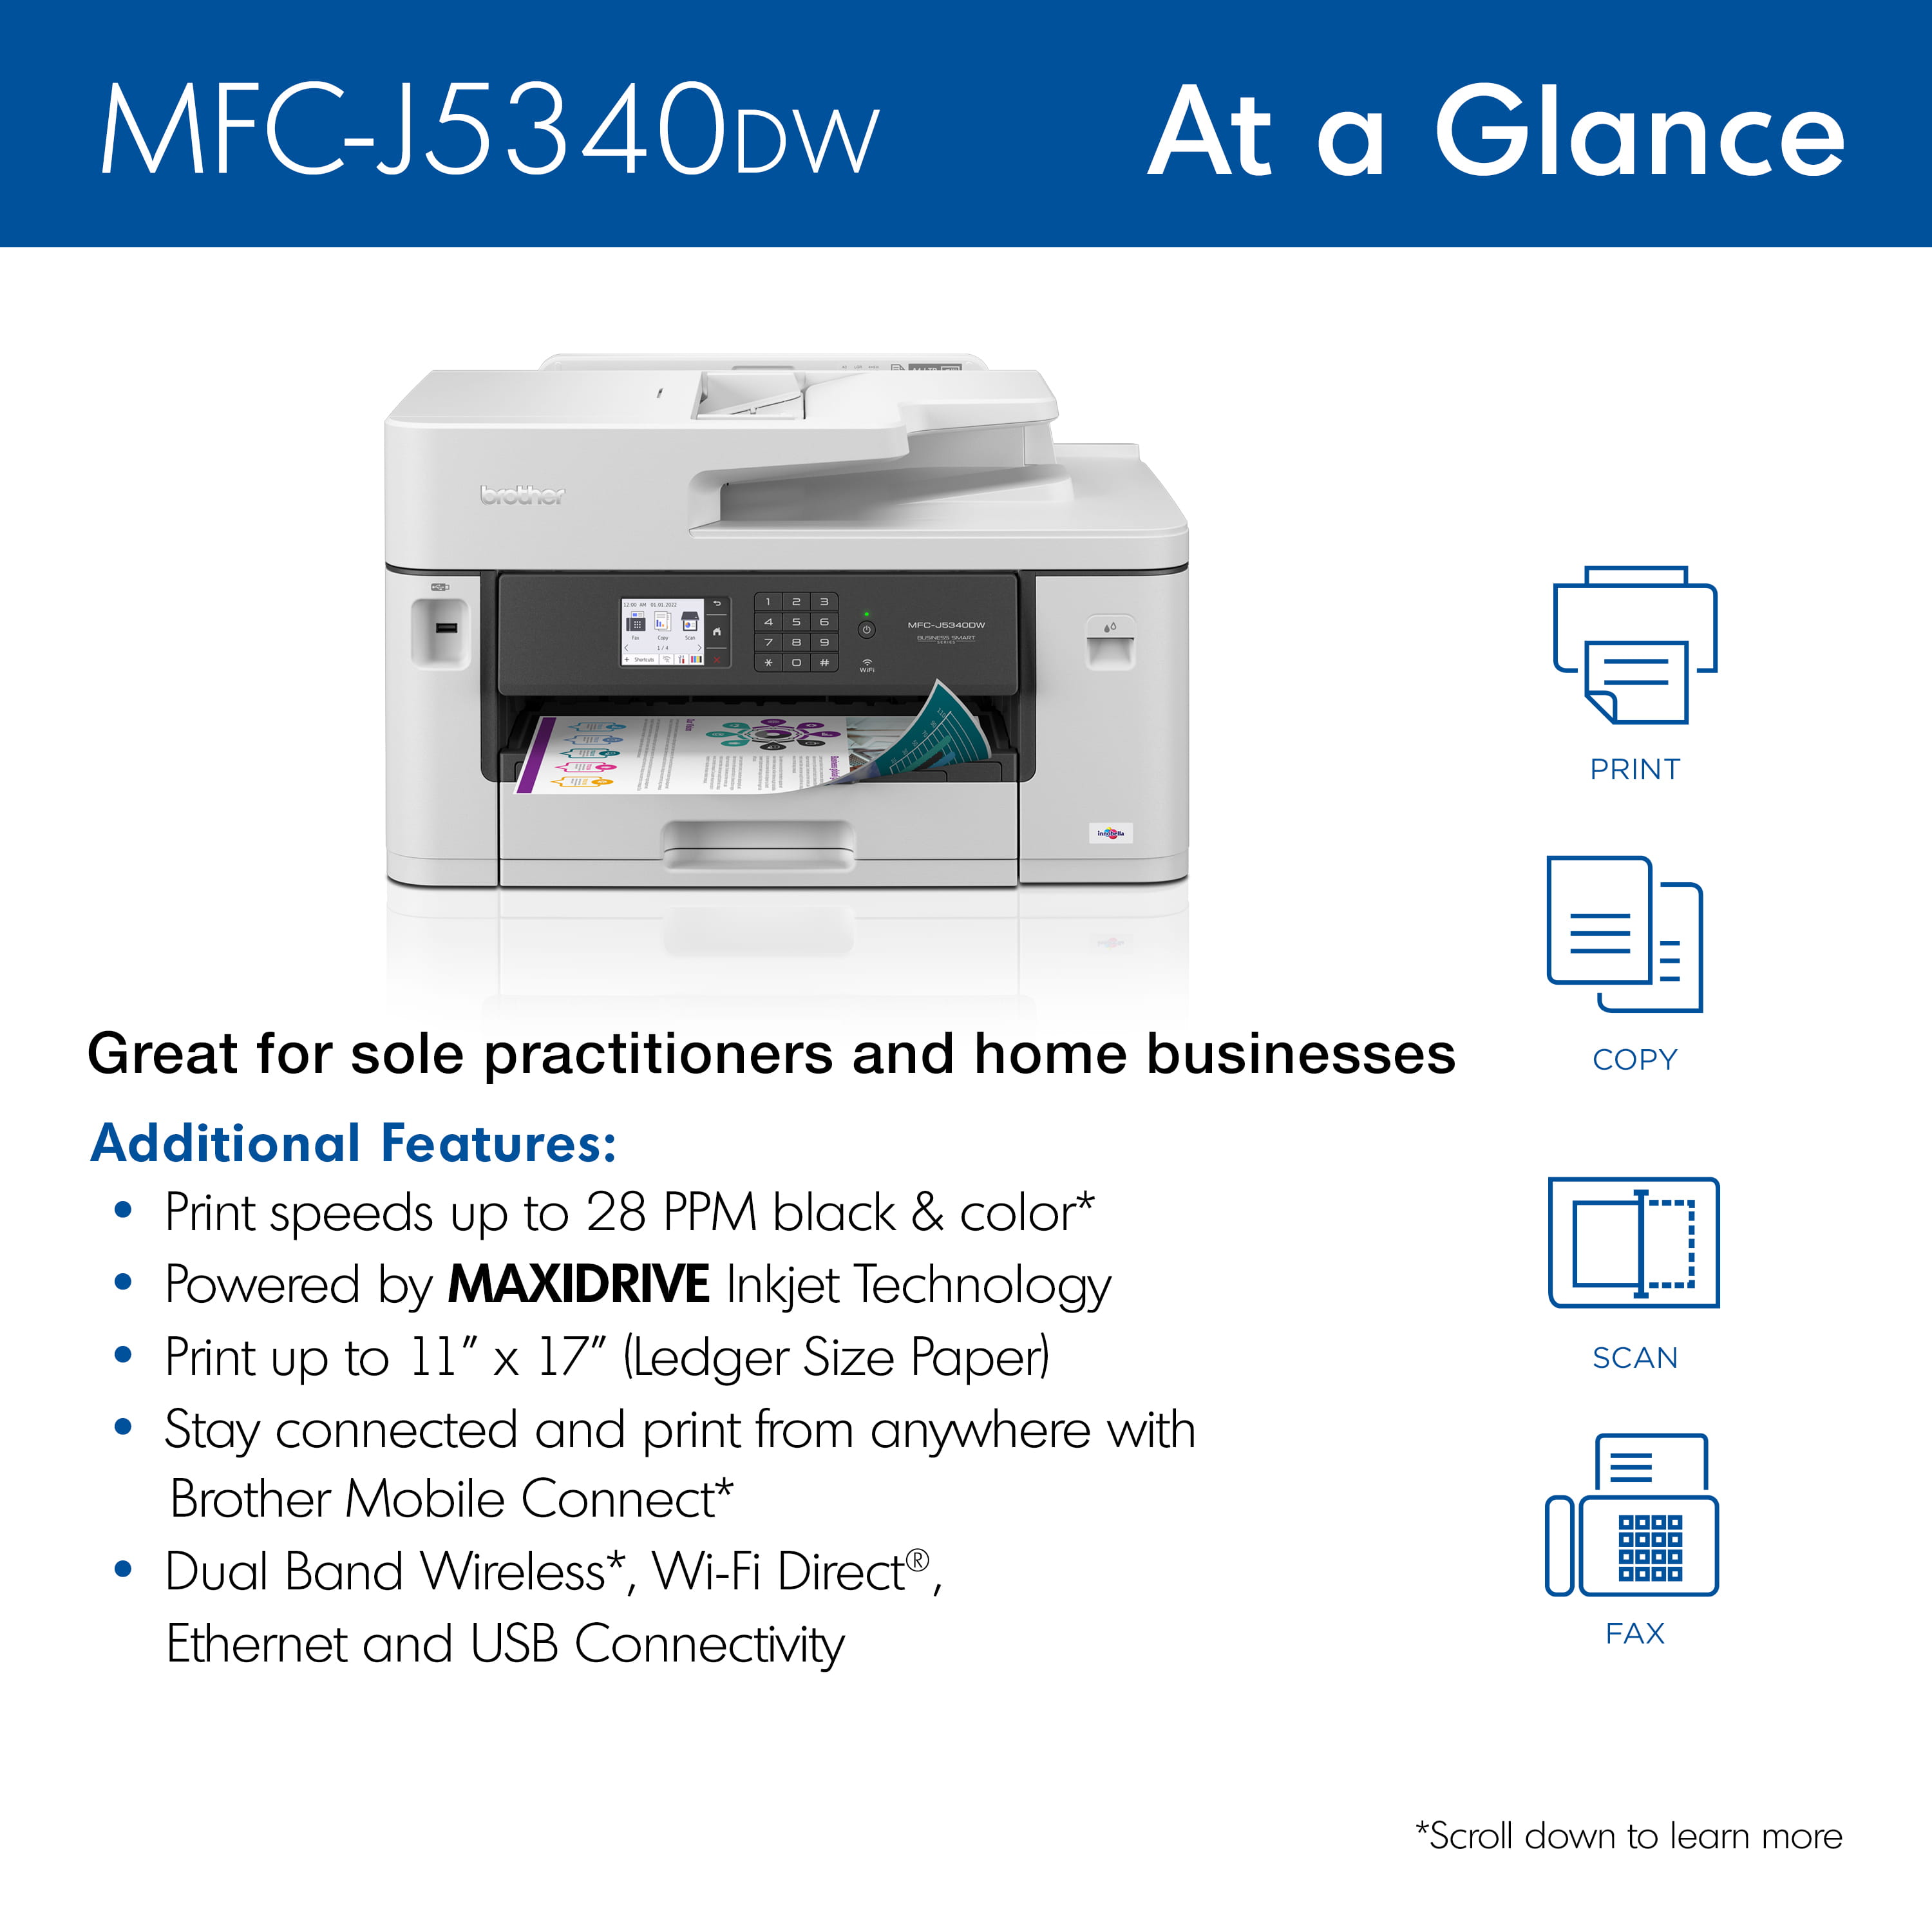 Brother MFC-J5340DW Business Color Inkjet All-in-One Printer with printing  up to 11”x17